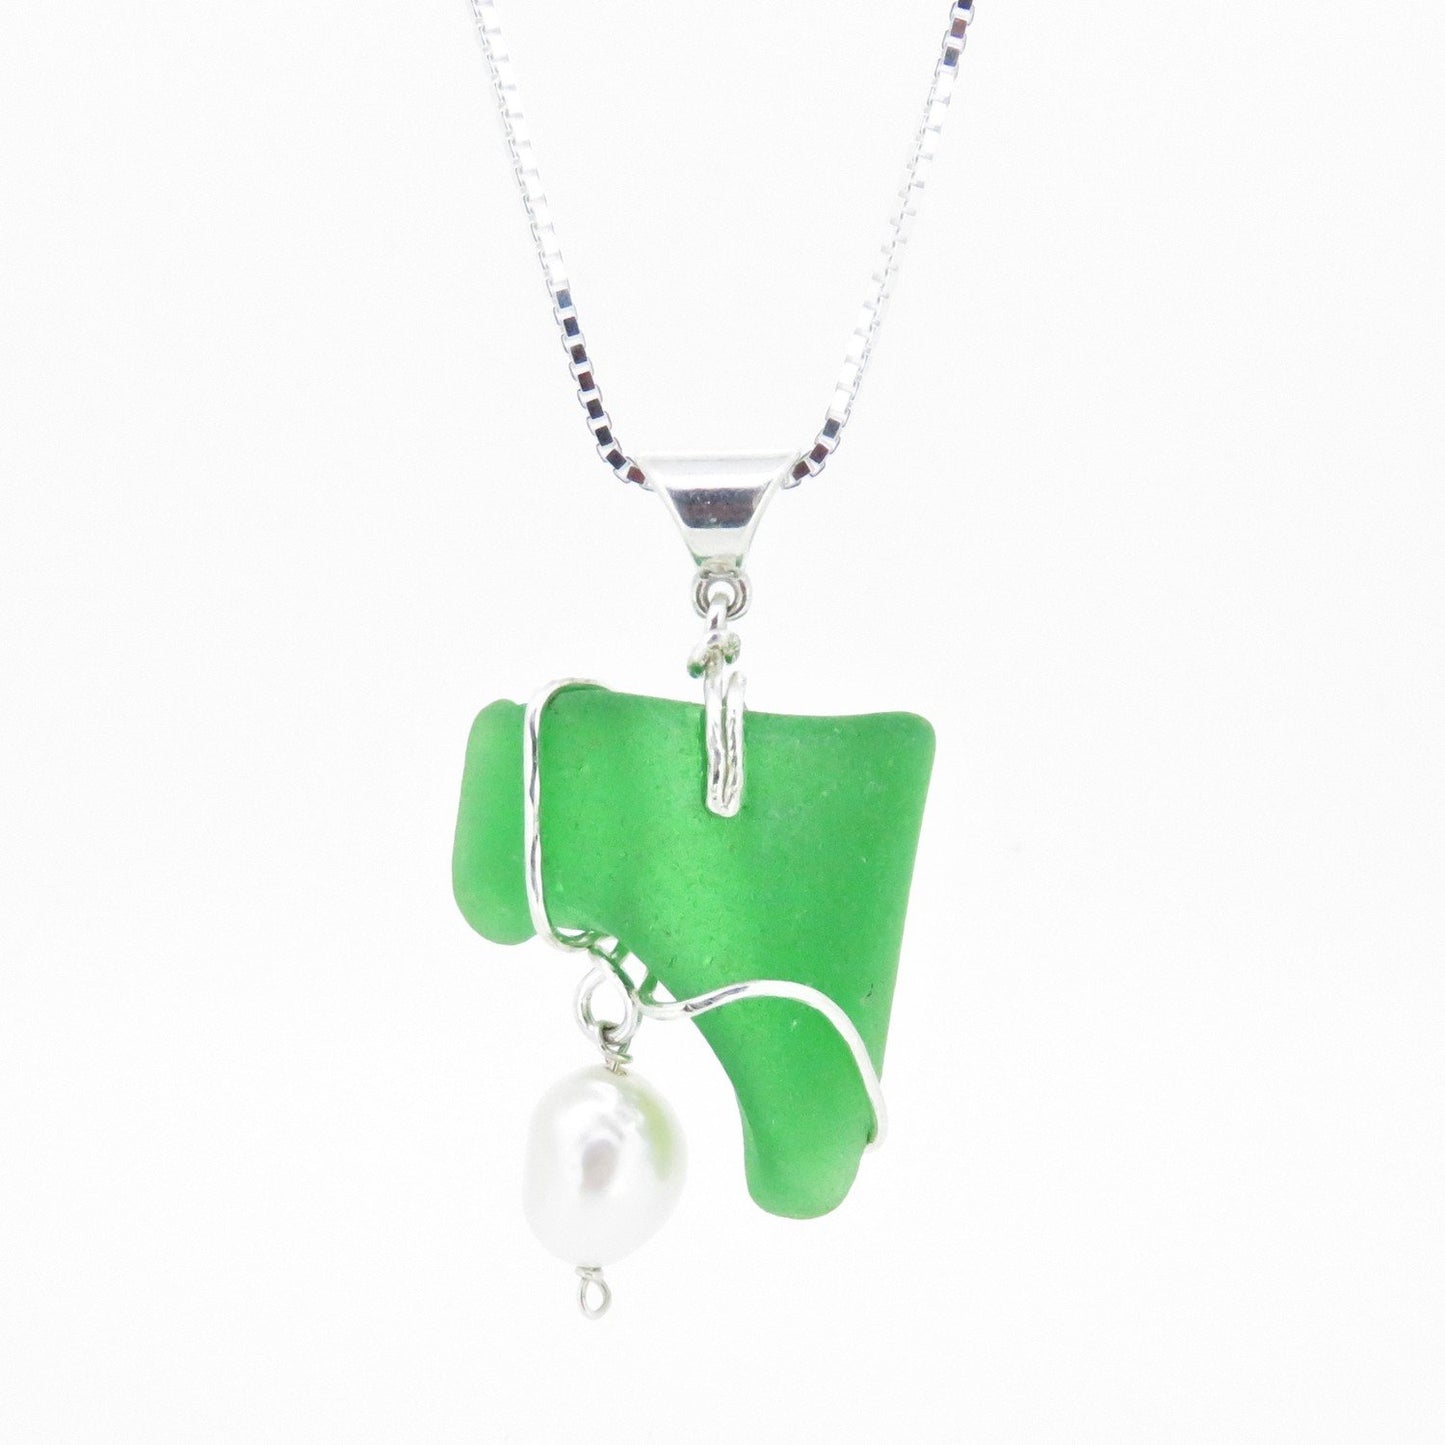 Green Seaglass Necklace with Pearl